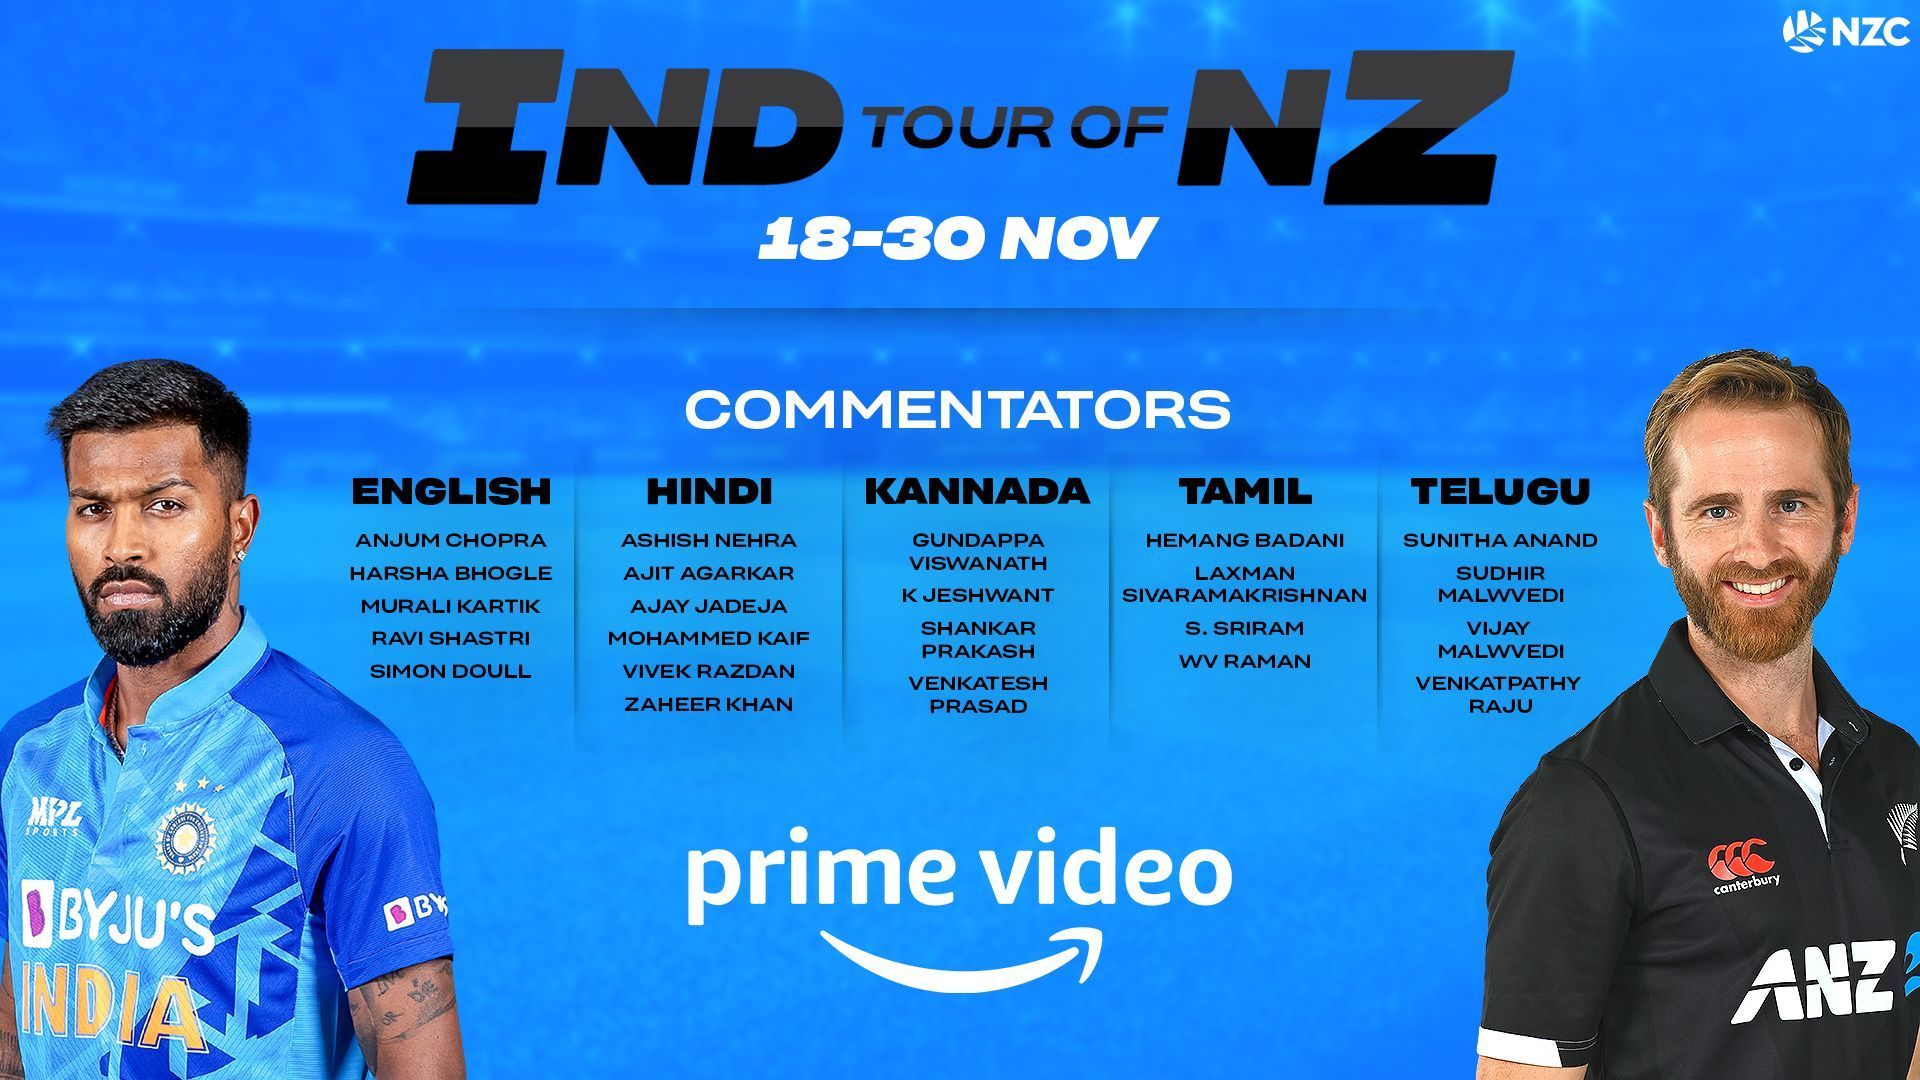 The IND vs NZ 2022 series has some big commentators who will bring all the action to cricket lovers